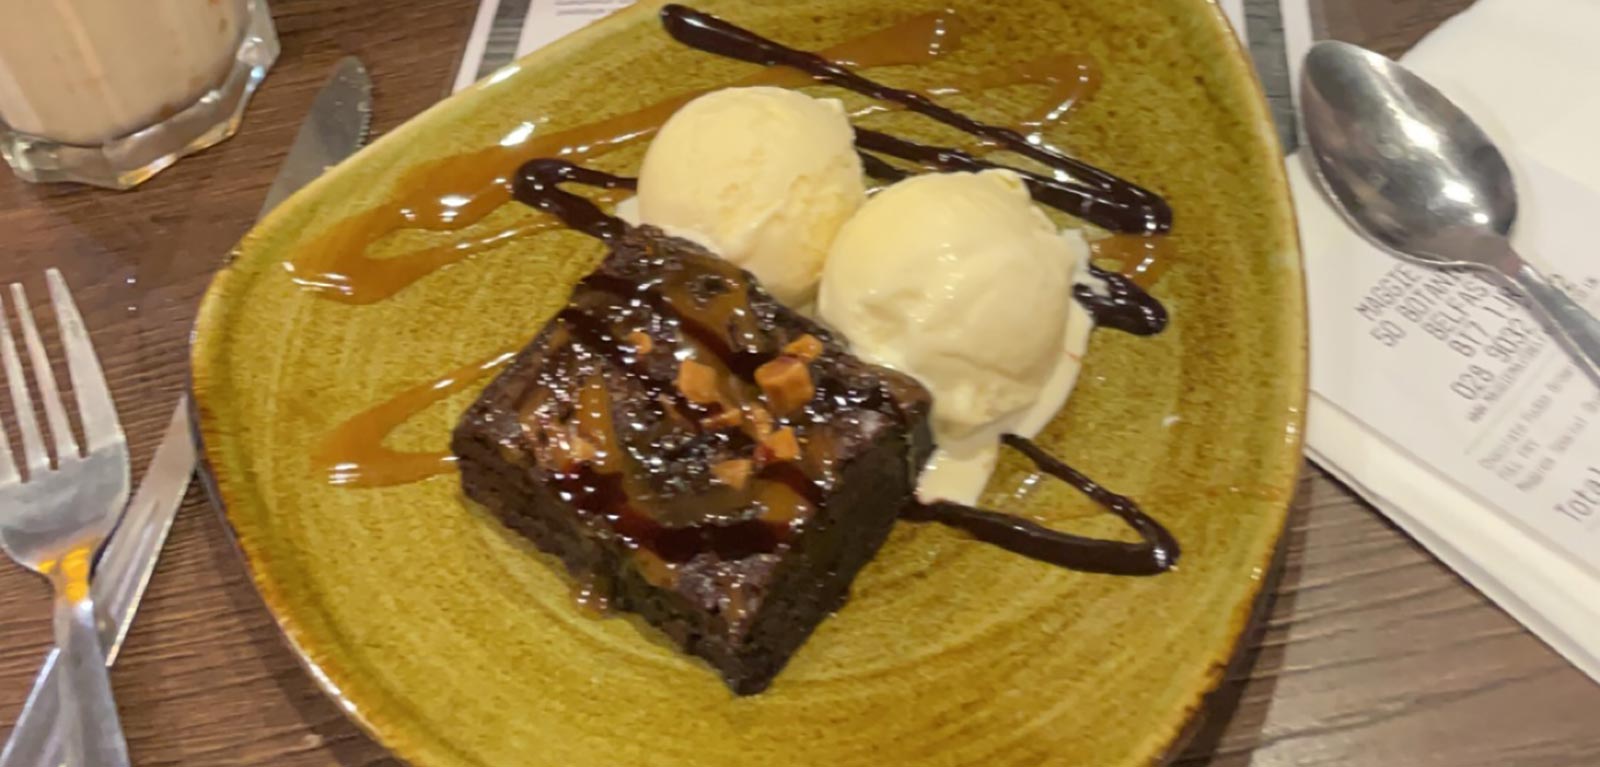 Brownie and ice cream from Maggie Mays